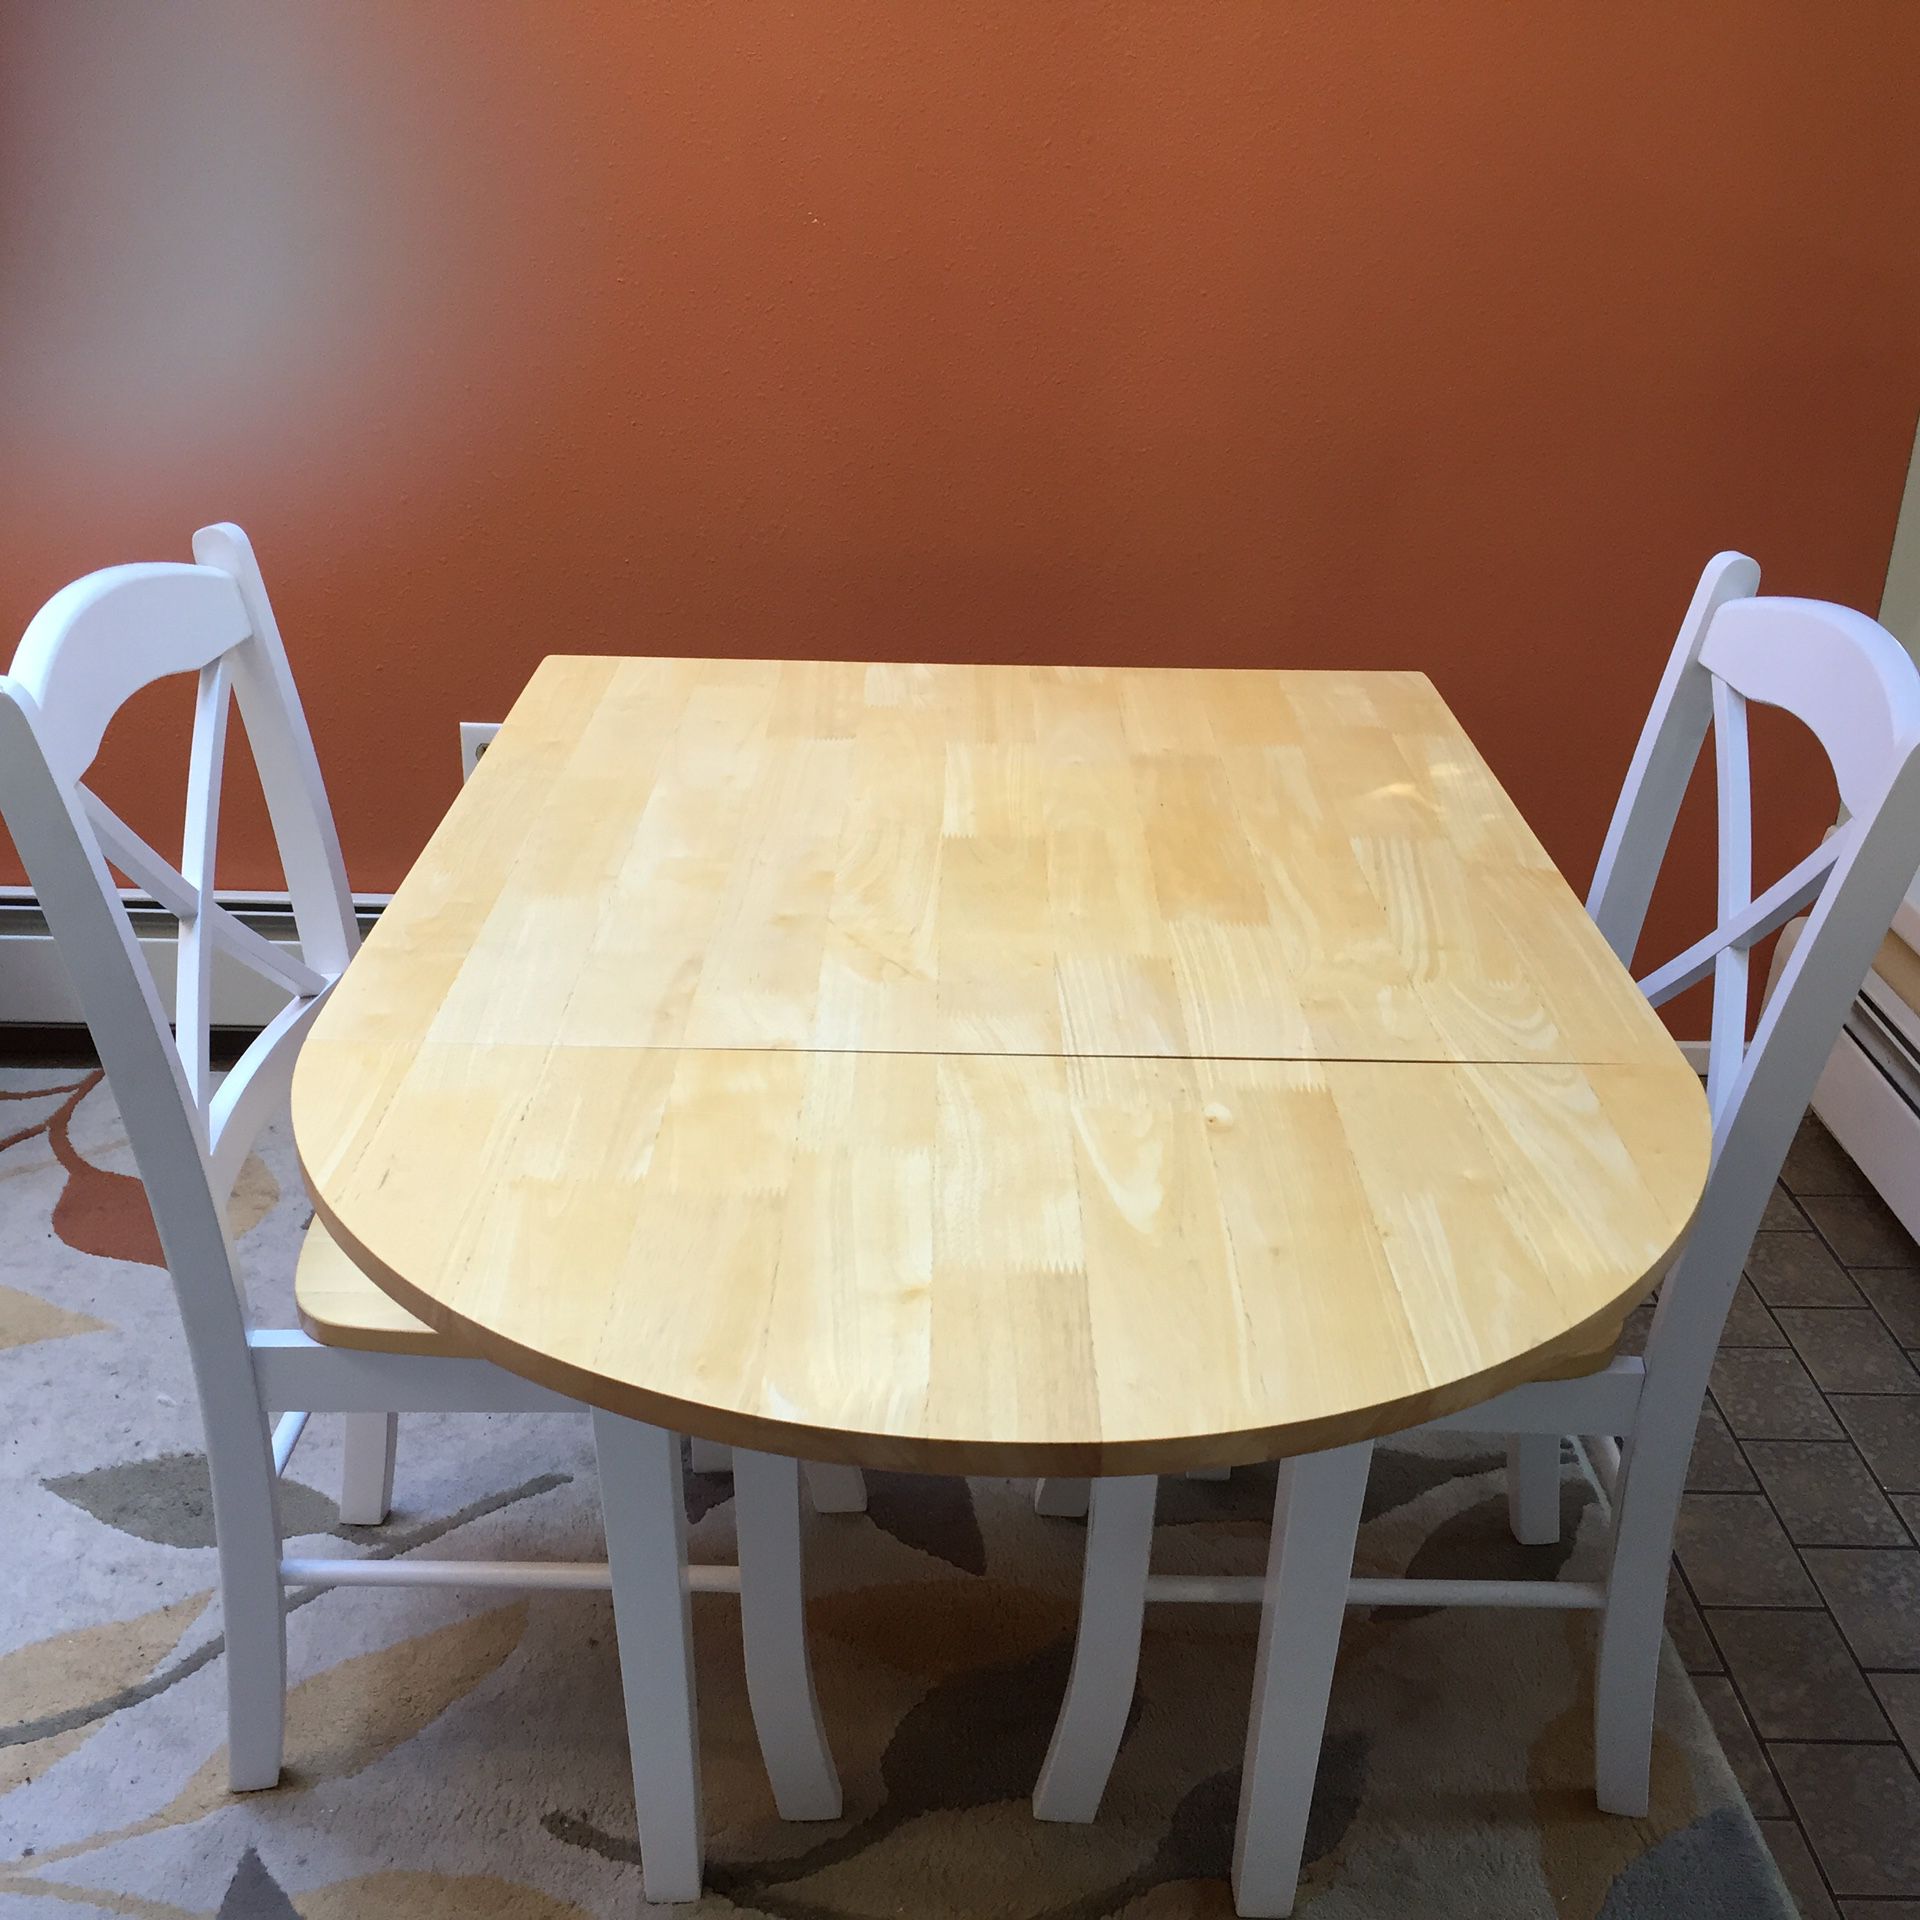 Kitchen table with two chairs